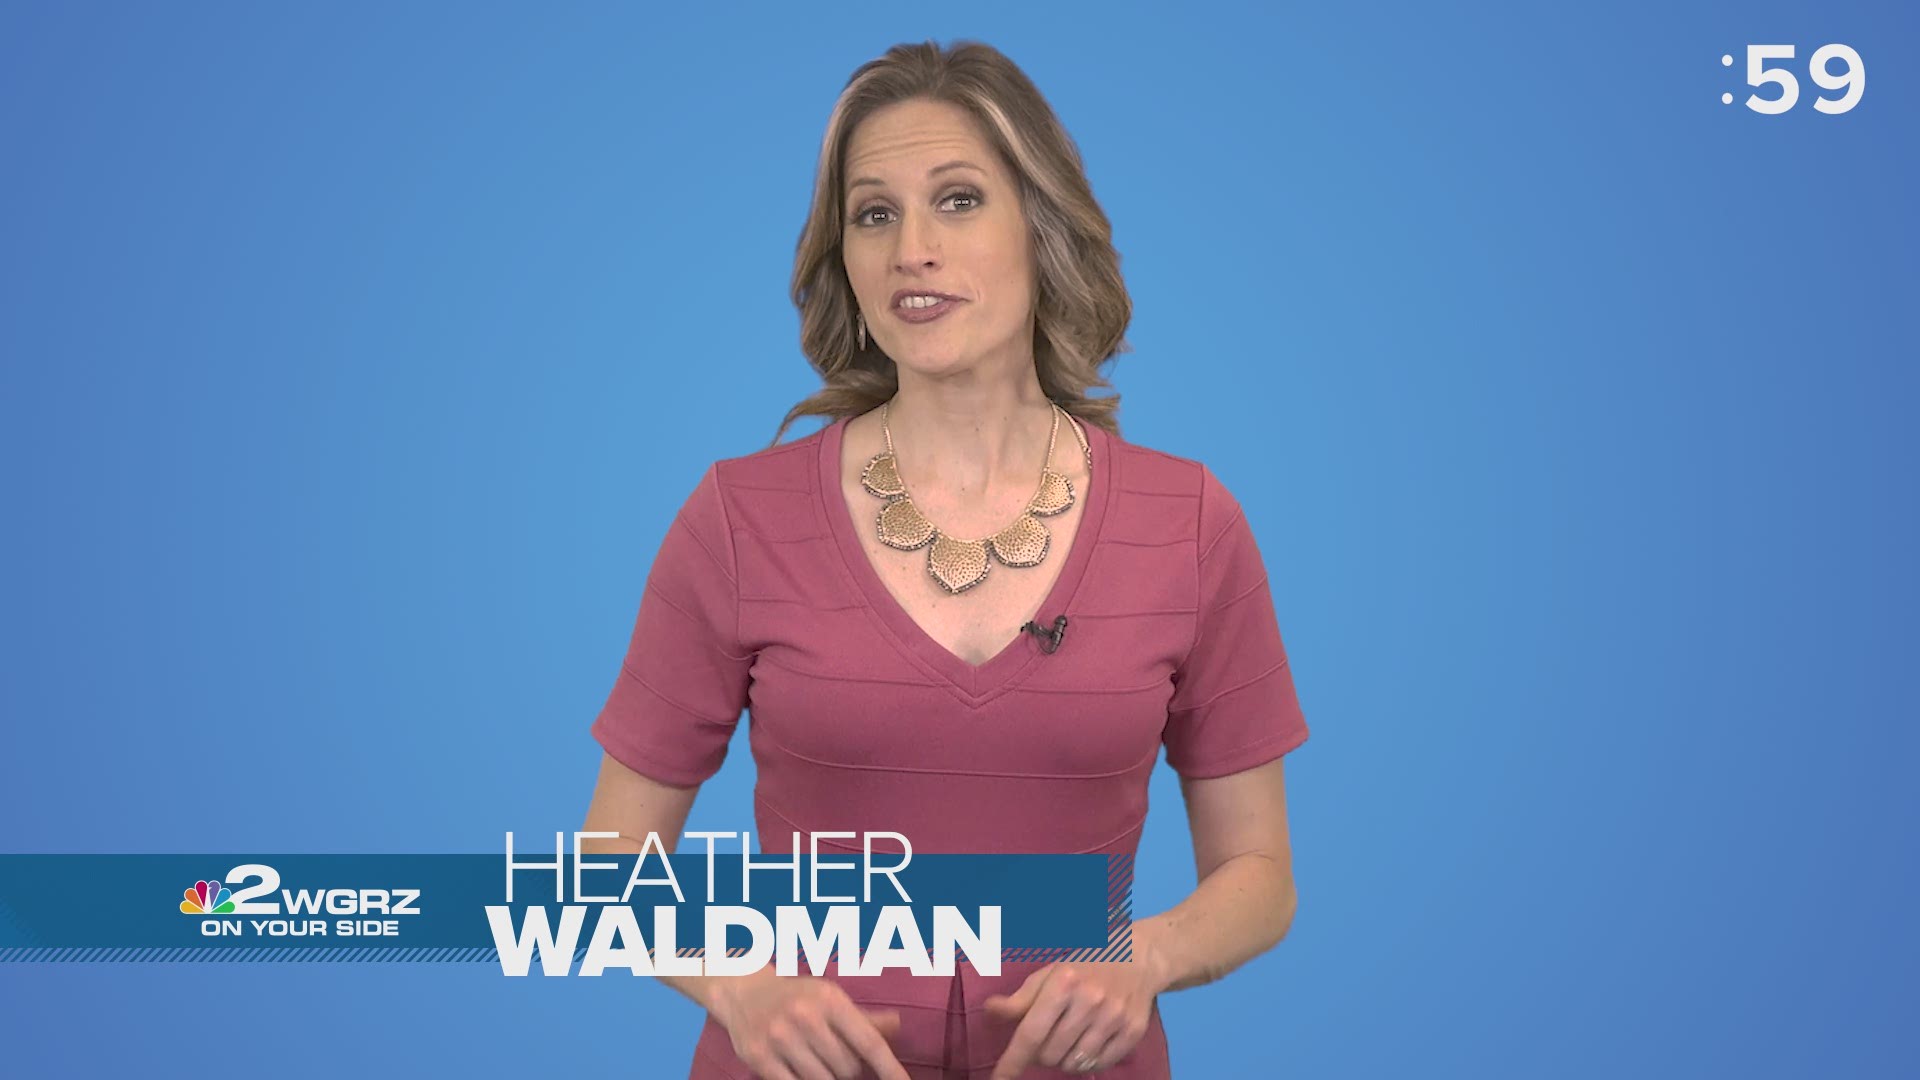 In just 60 short seconds, Storm Team 2's Heather Waldman gives us a rapid-fire mini lesson on climate science. Episode one explains the big difference between our day-to-day weather and our evolving climate.